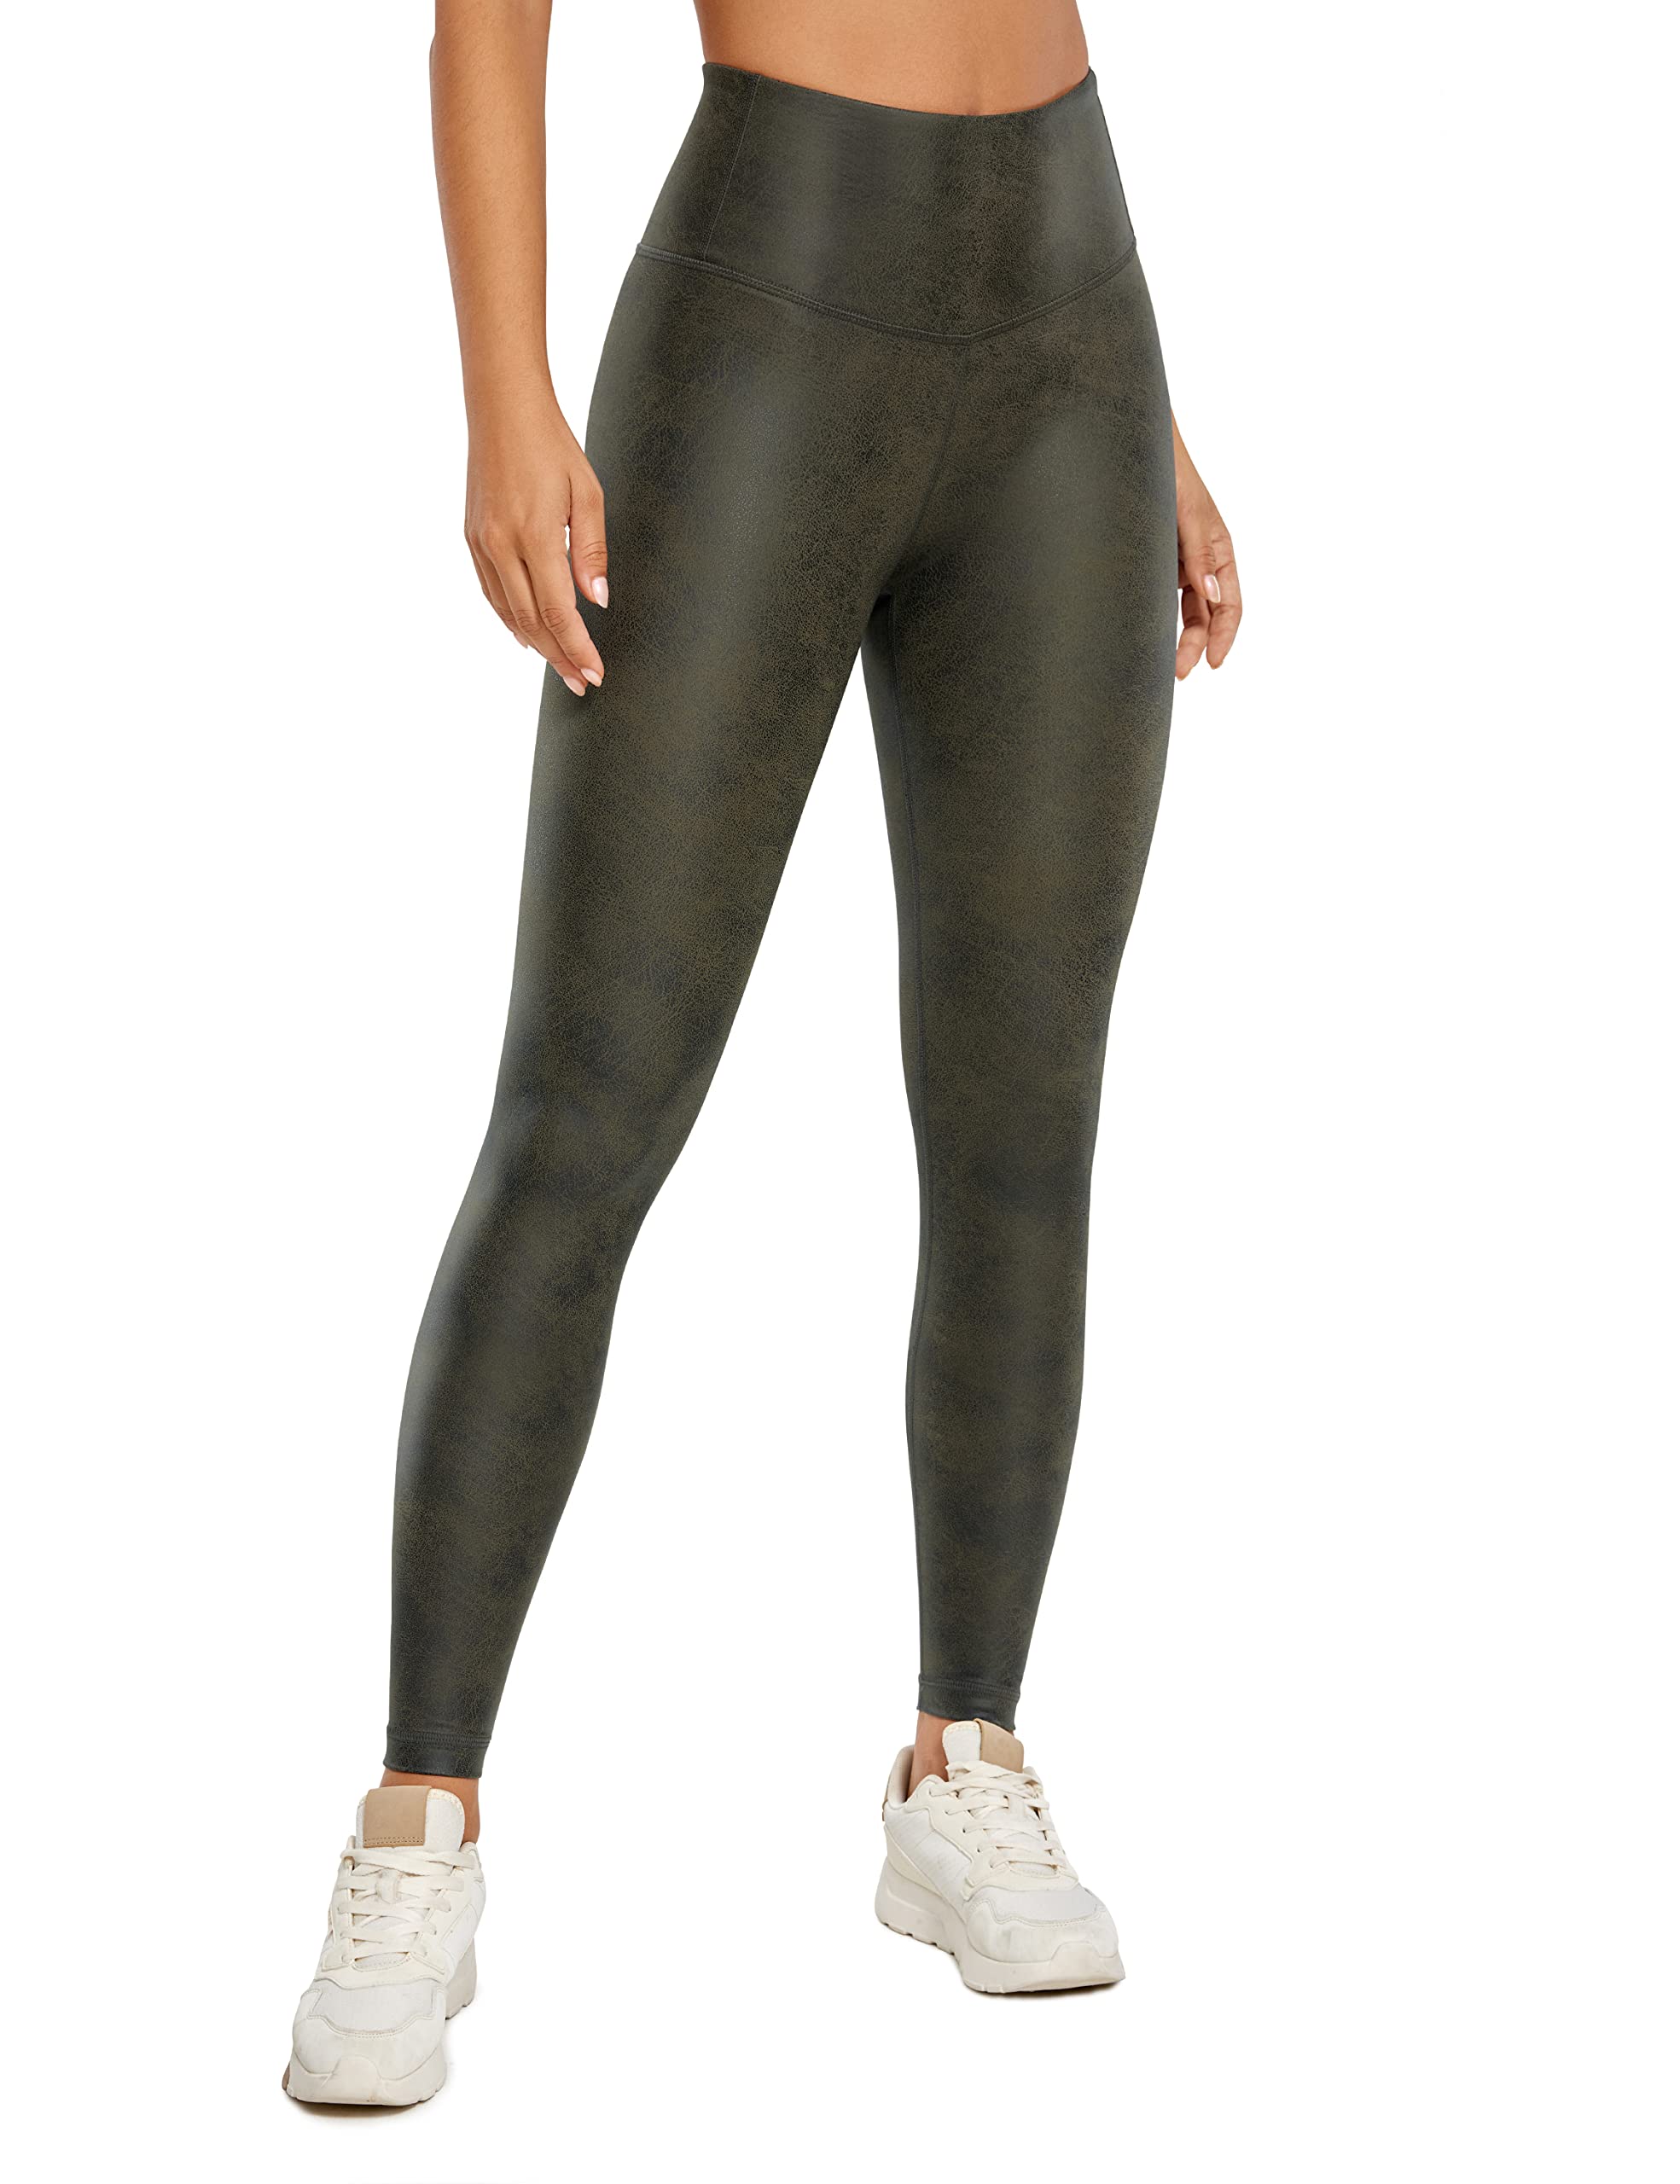 CRZ YOGA cRZ YOgA Matte Faux Leather Leggings for Women 28 - High Waisted  Stretch Full Length Leather Pants Workout Pleather Tights green